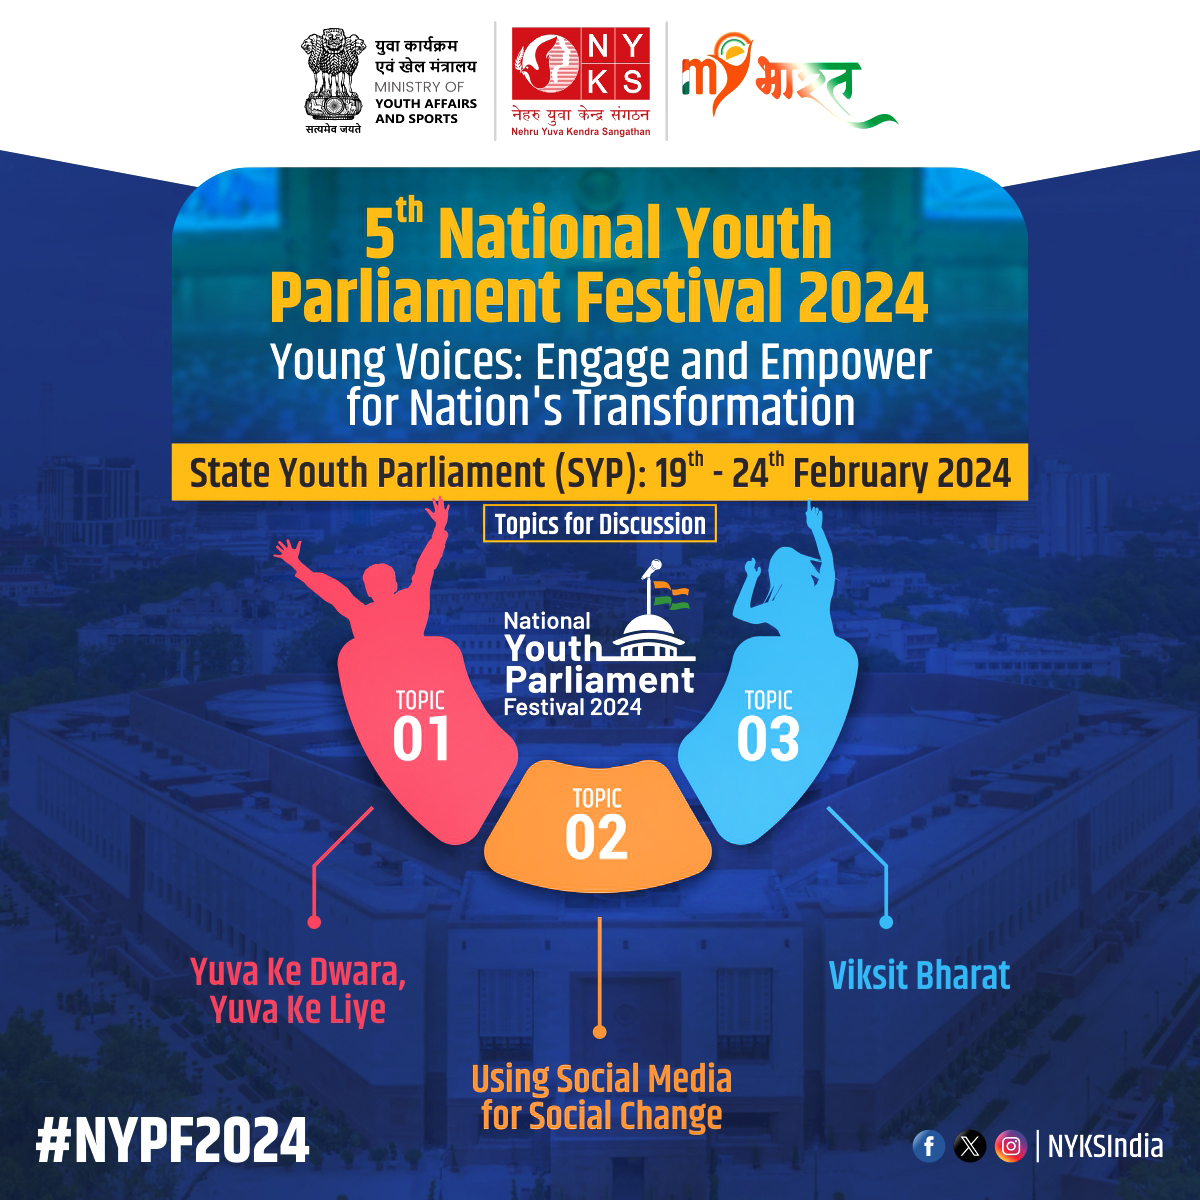 📢Announcing the thought-provoking topics for the State Youth Parliament Festival 2024! Let's ignite discussions, inspire change, and shape our nation's future together! 🌟 #NYPF2024 #MYBharatViksitBharat #YouthParliament2024 #YouthEmpowerment #NYKS